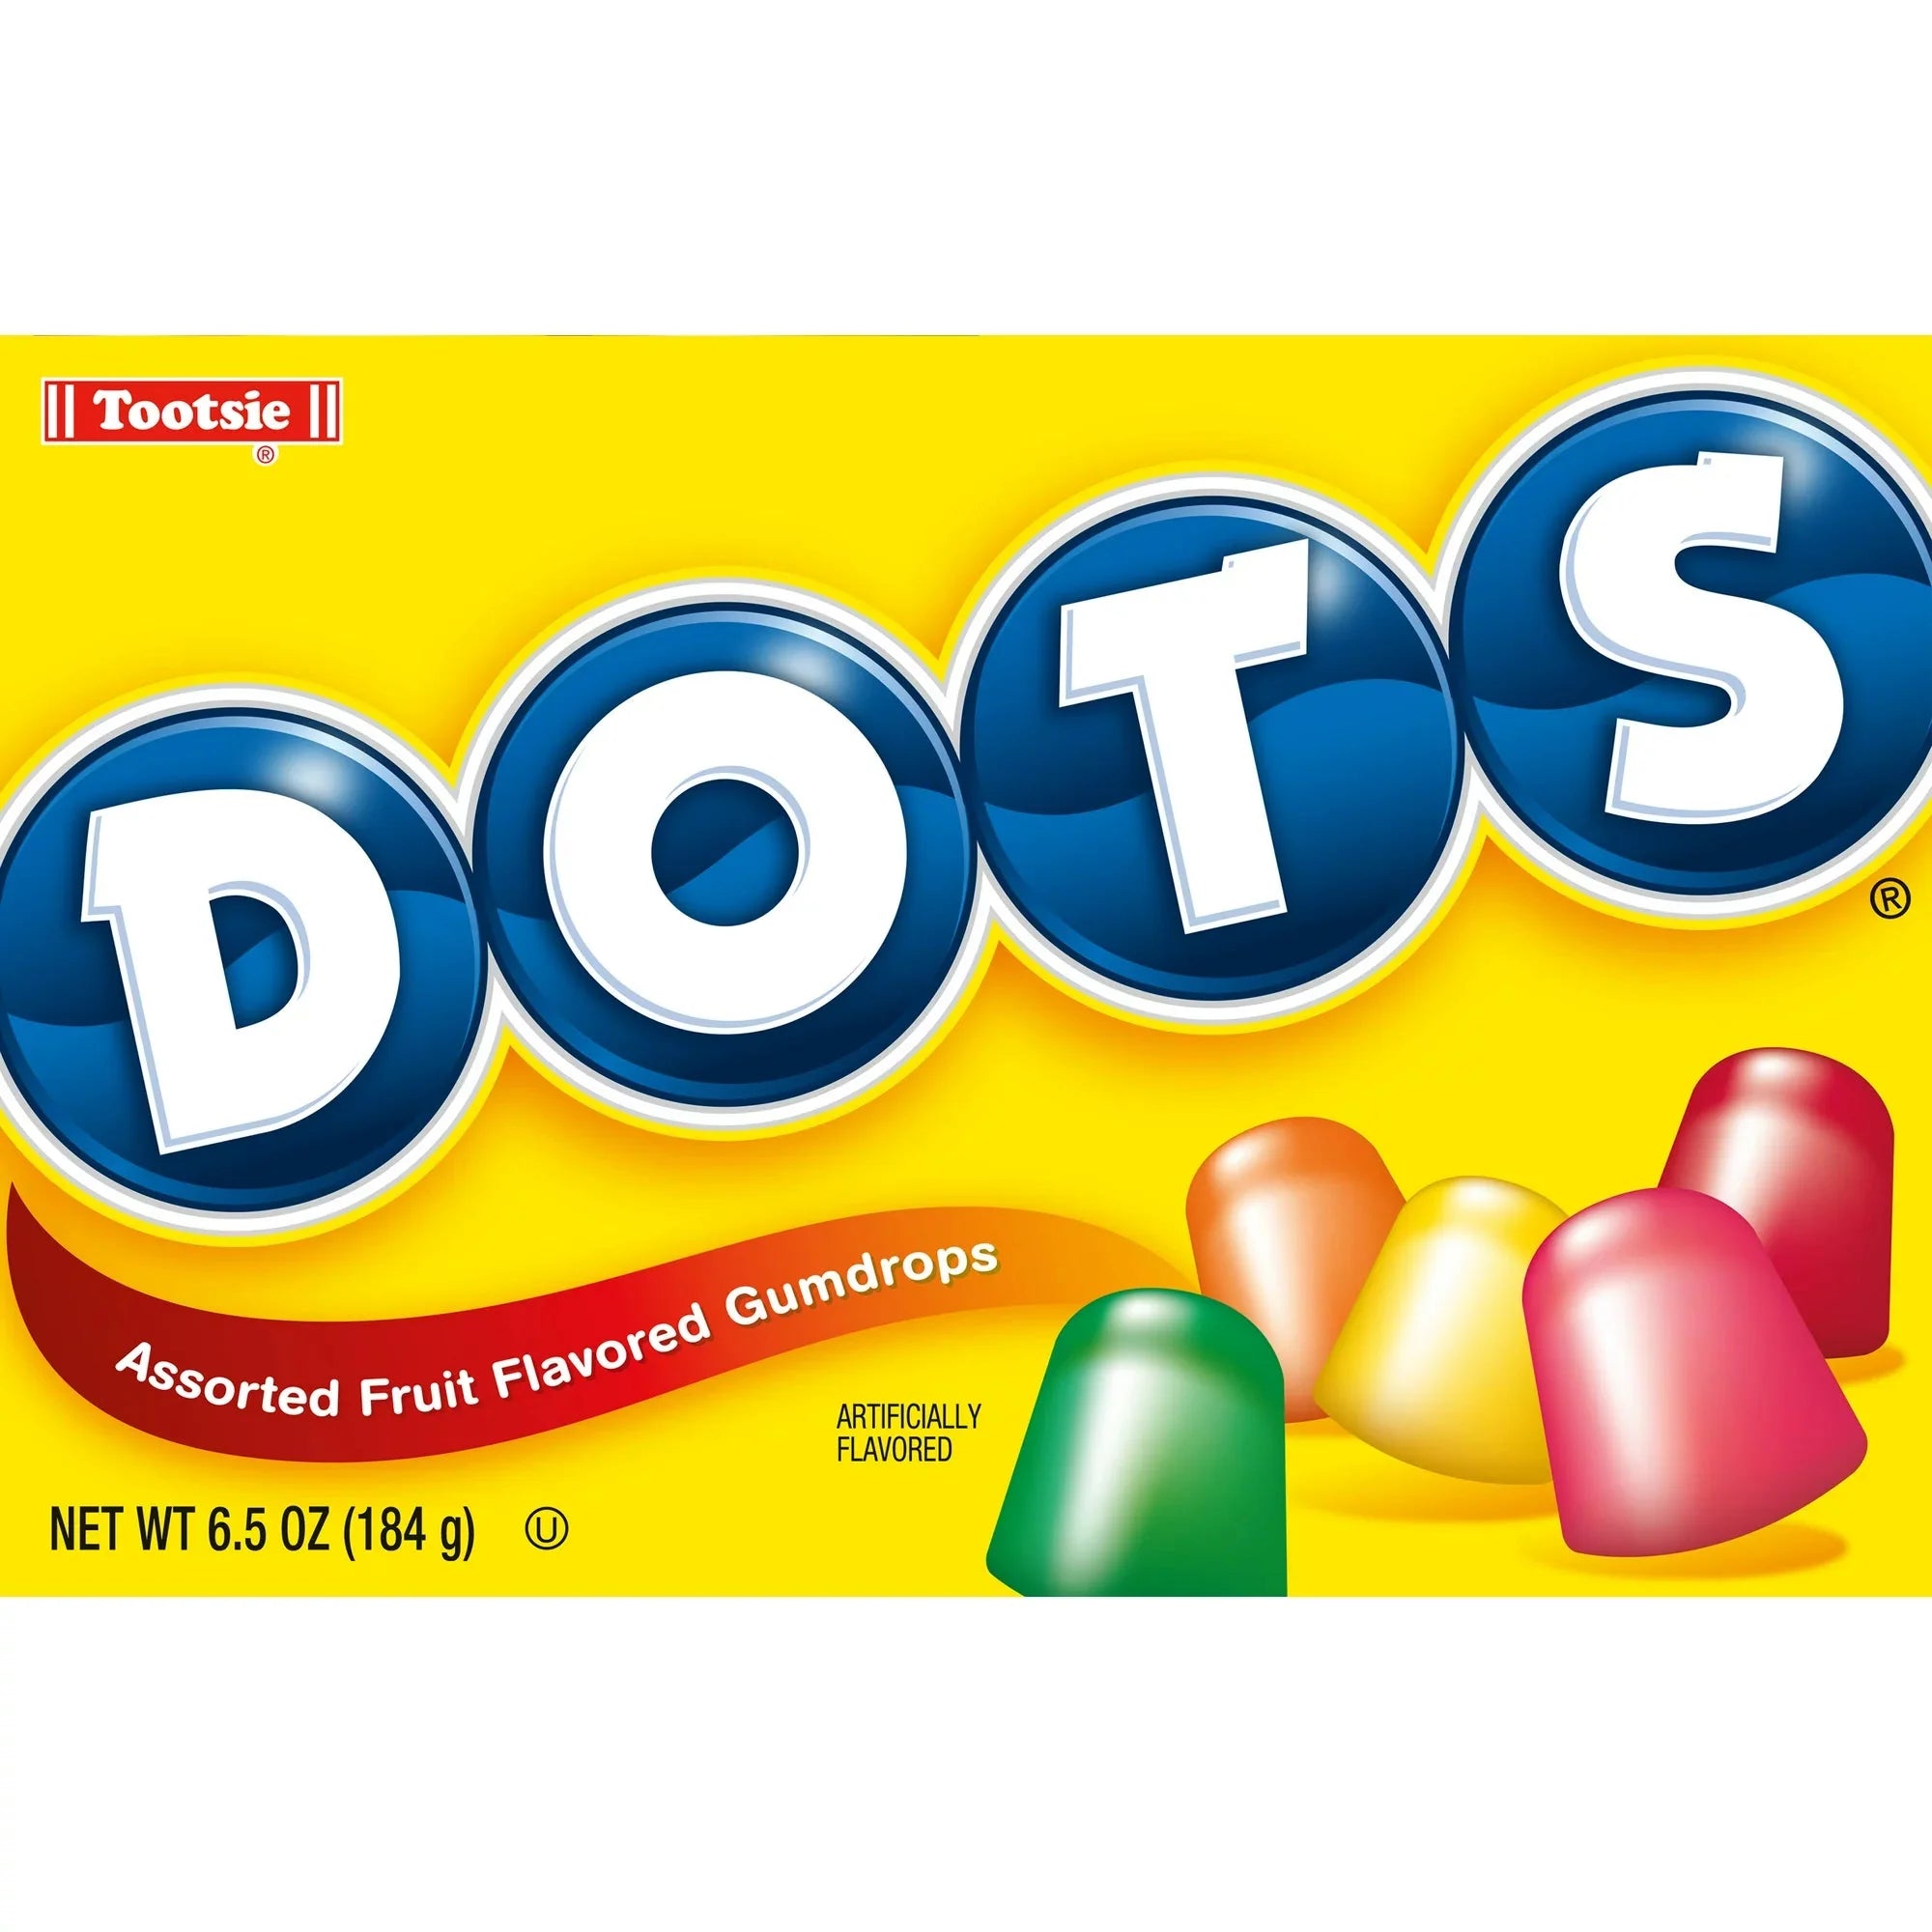 Wholesale prices with free shipping all over United States Tootsie Dots Assorted Fruit Flavored Gumdrops, 6.5 Oz - Steven Deals